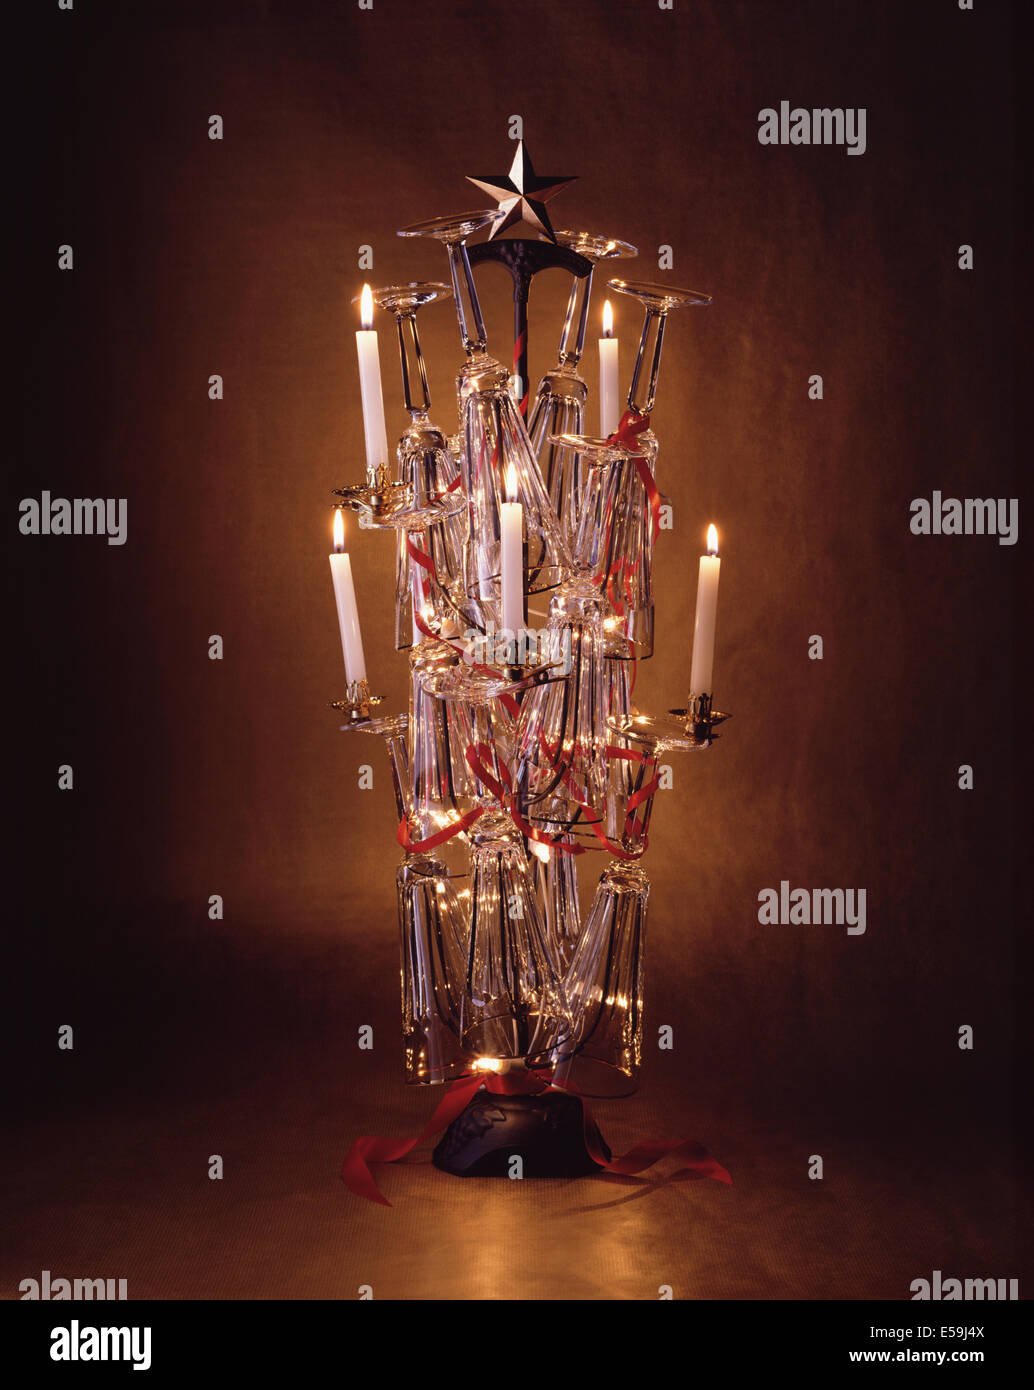 A Cast Iron Glass Tree Holder With Ralph Lauren Champagne Flutes On It With Red Ribbon Intertwined Between Them And Lit White C Stock Photo Alamy